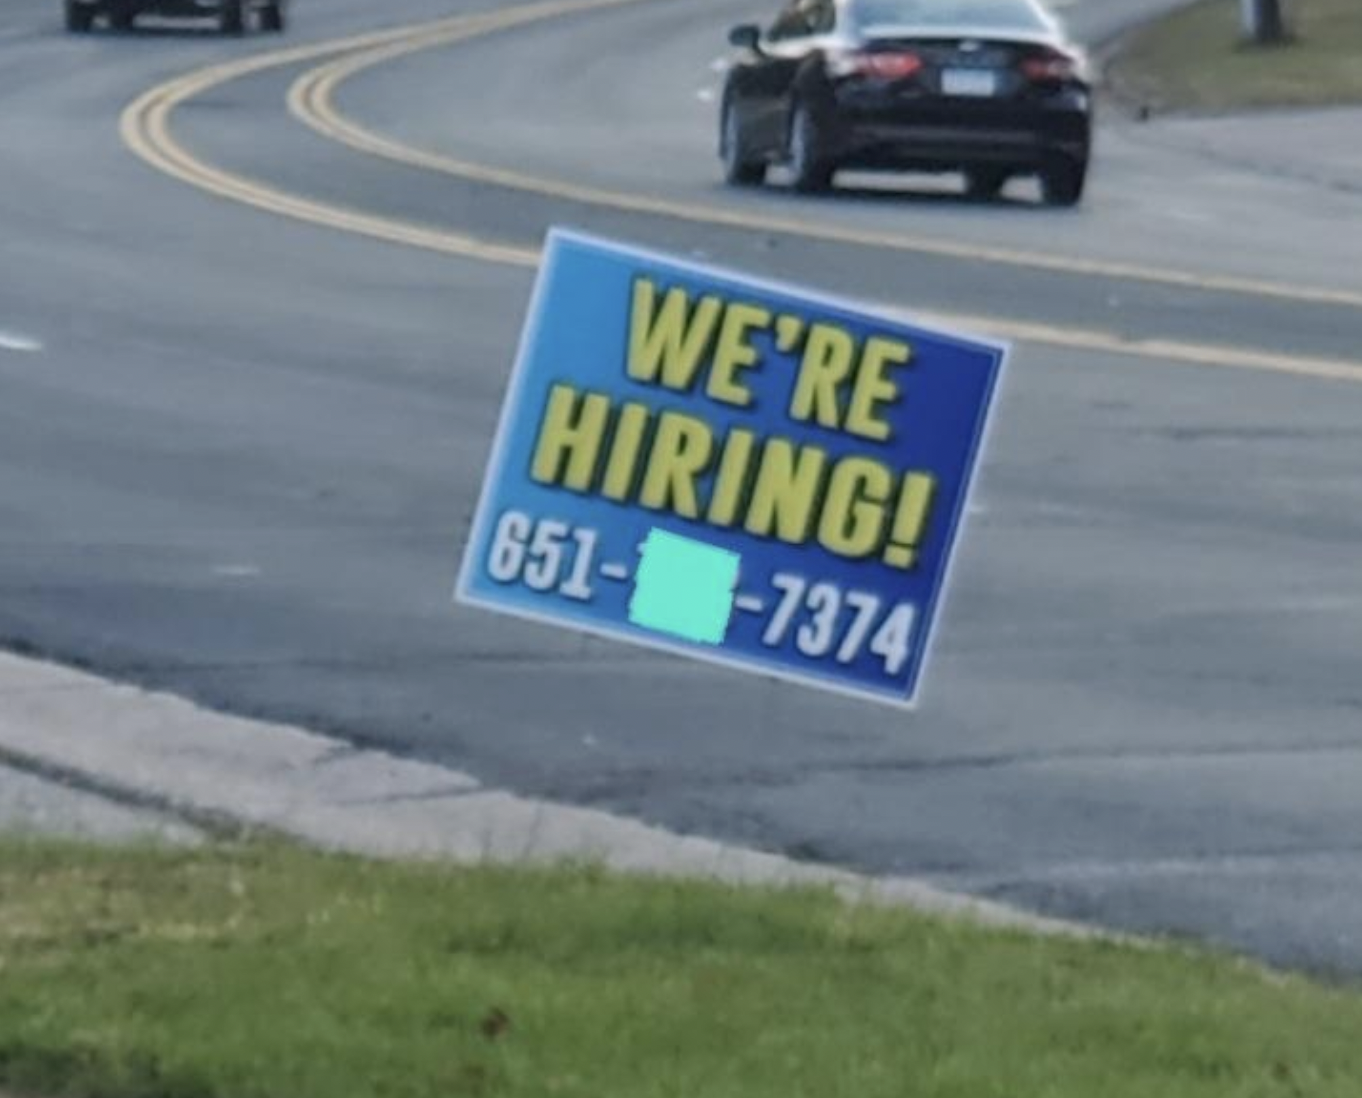 Great, but who is hiring?